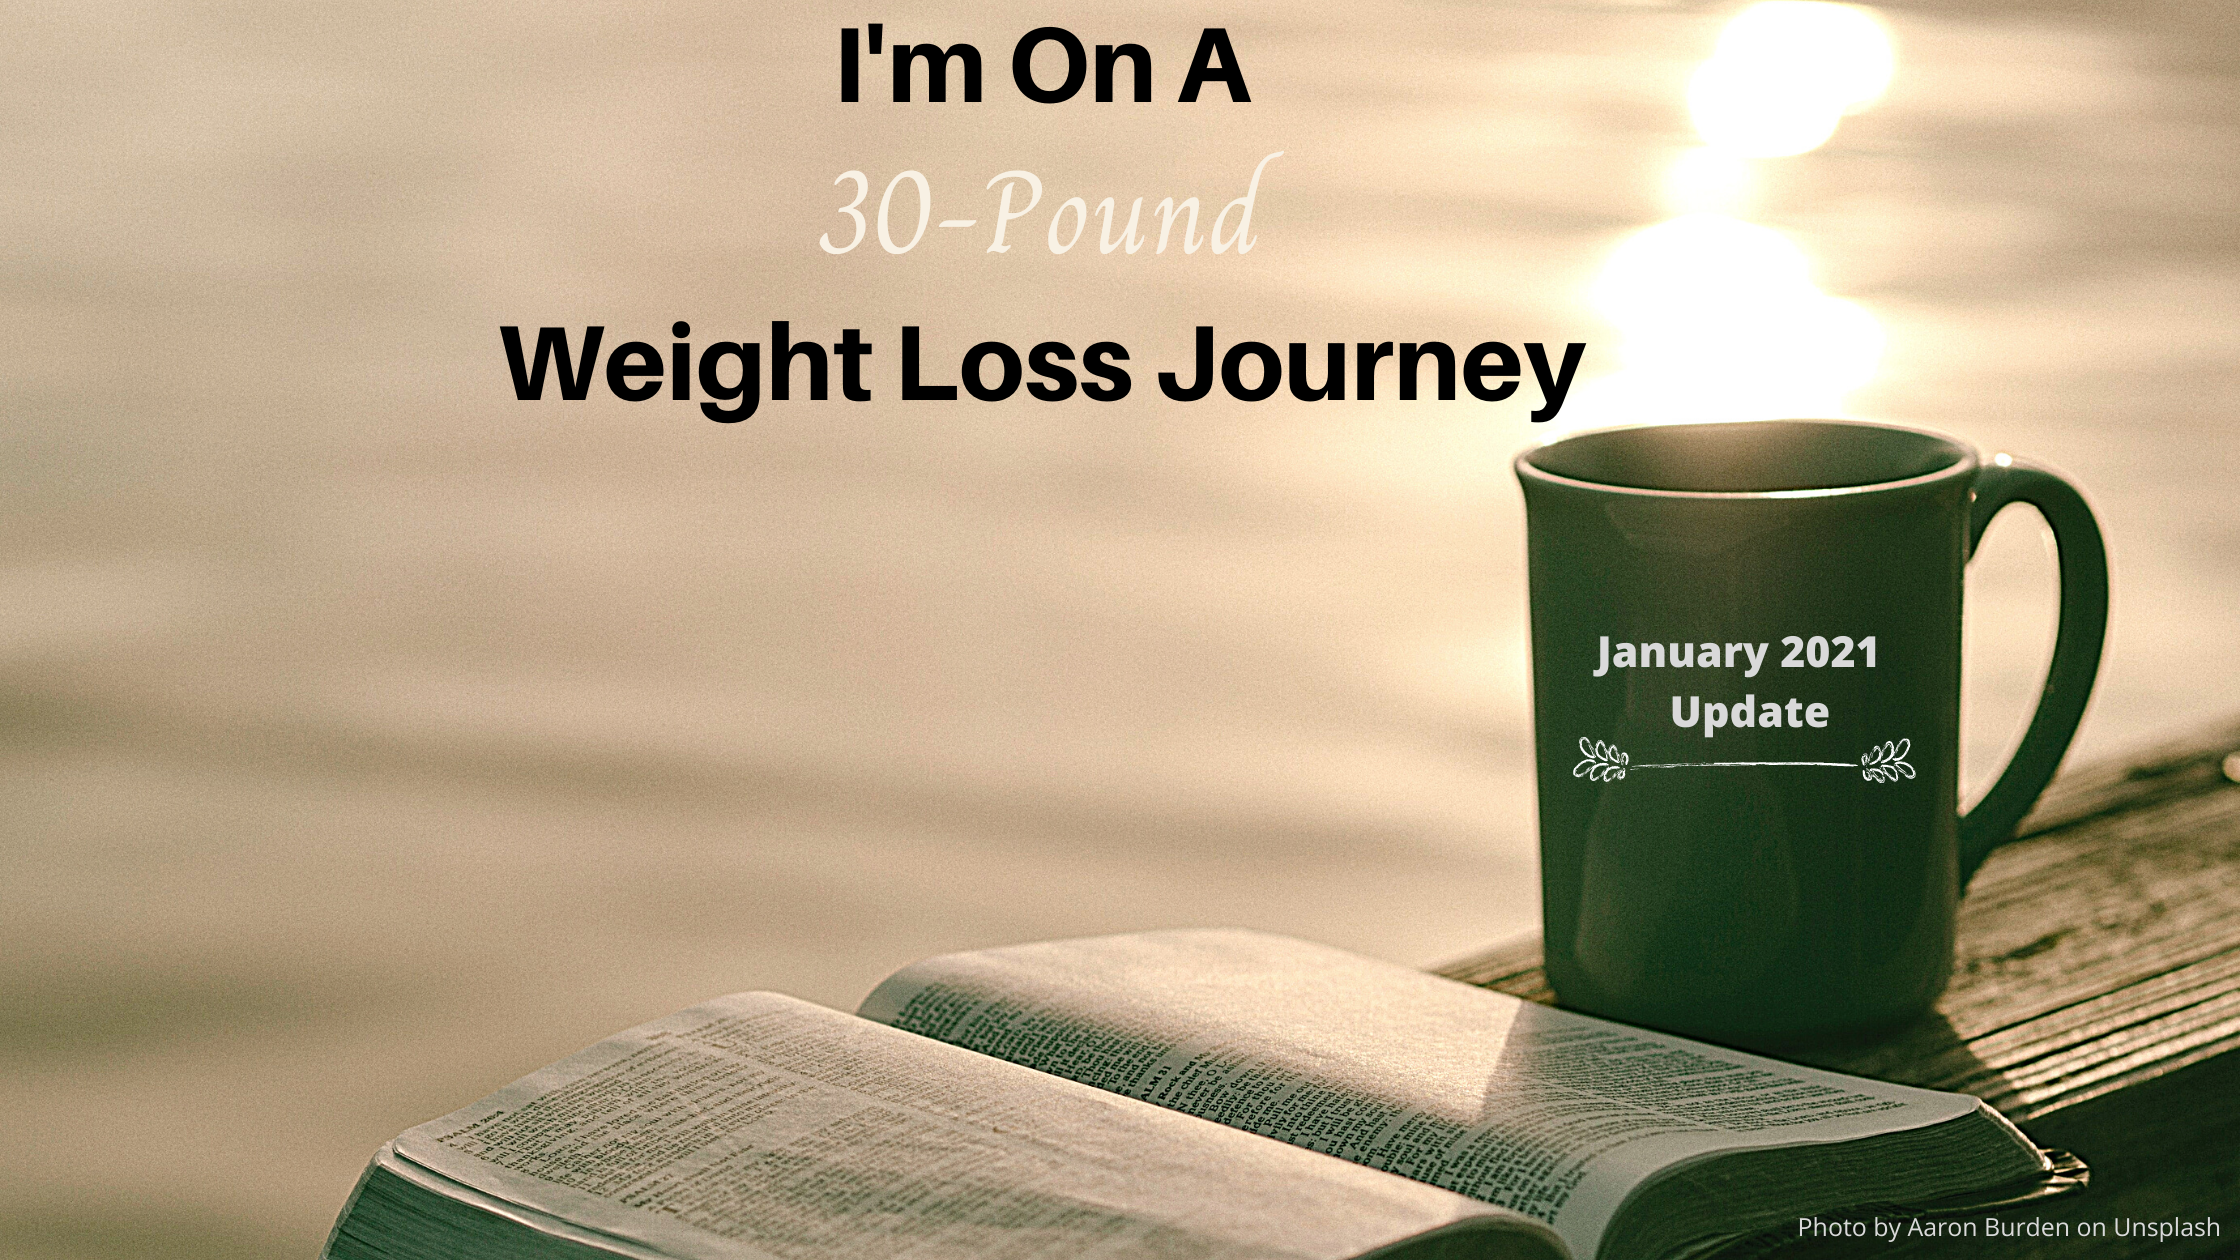 I’m On A 30-Pound Weight Loss Journey: January 2021 Update